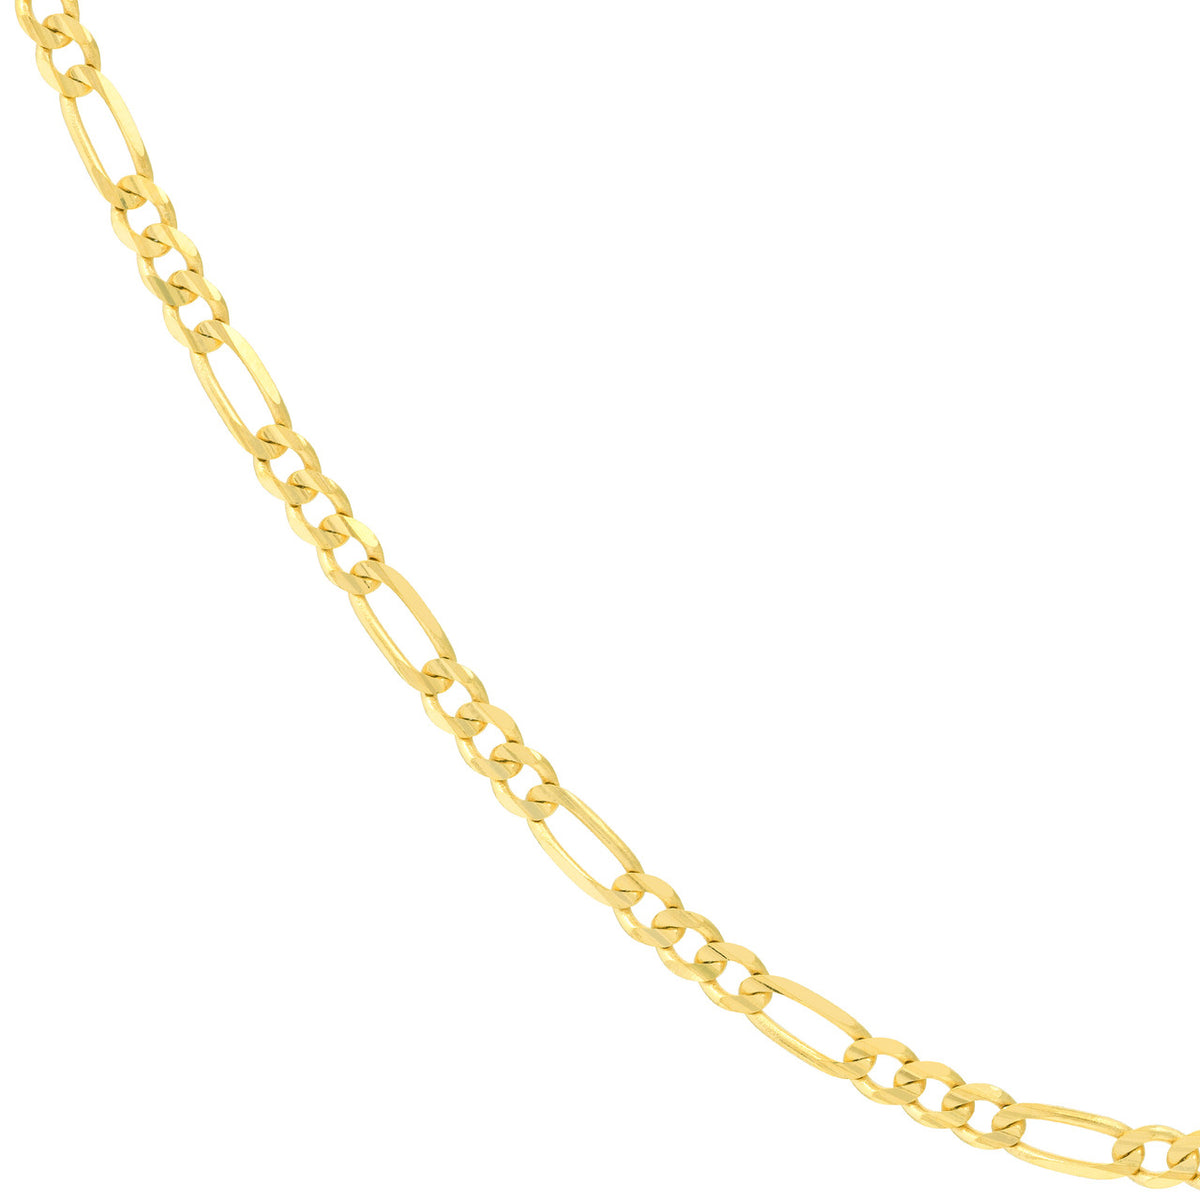 14K Yellow Gold or White Gold 3.2mm Concave Figaro Chain Necklace with Lobster Lock